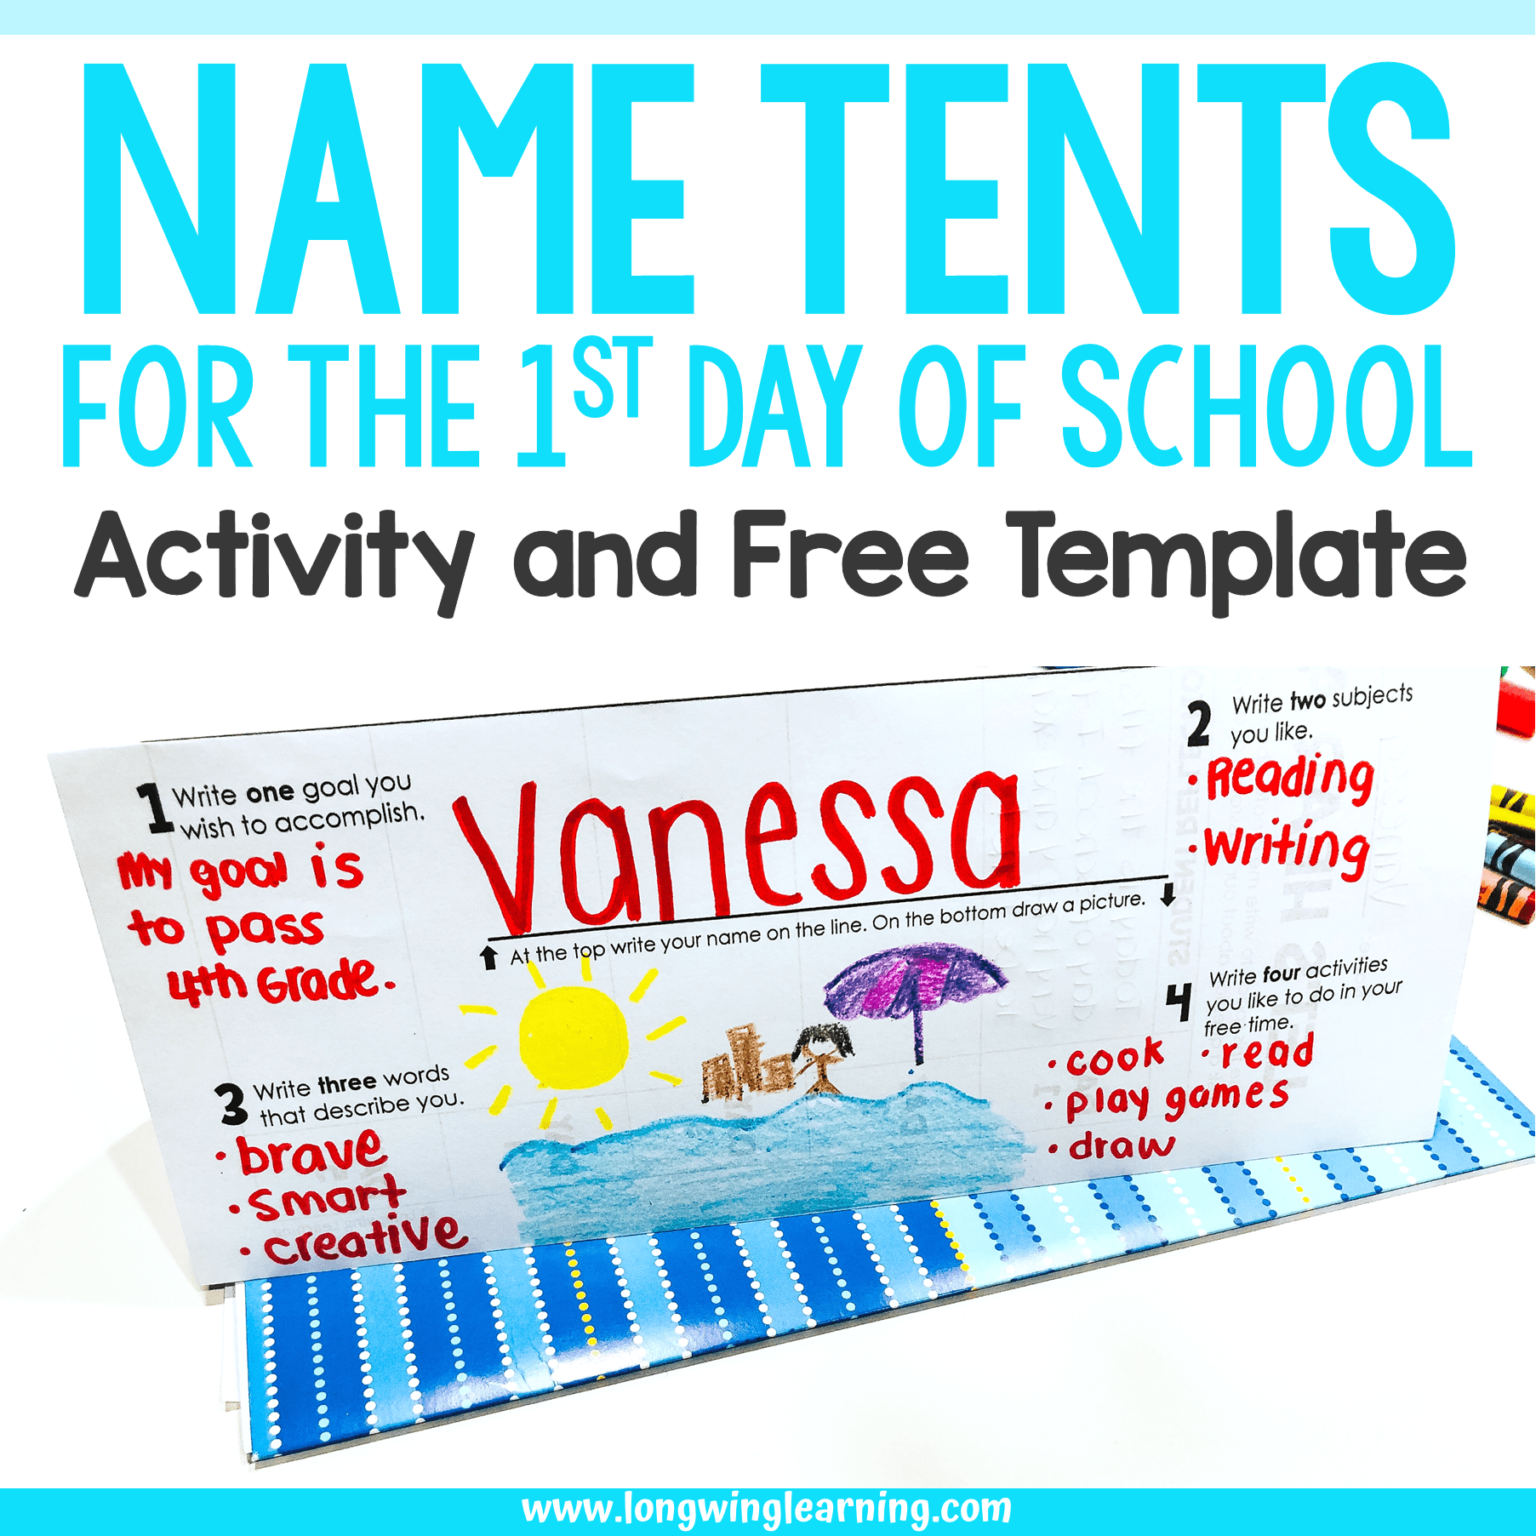 Name Tent Activity For The First Day Of School + Free Template